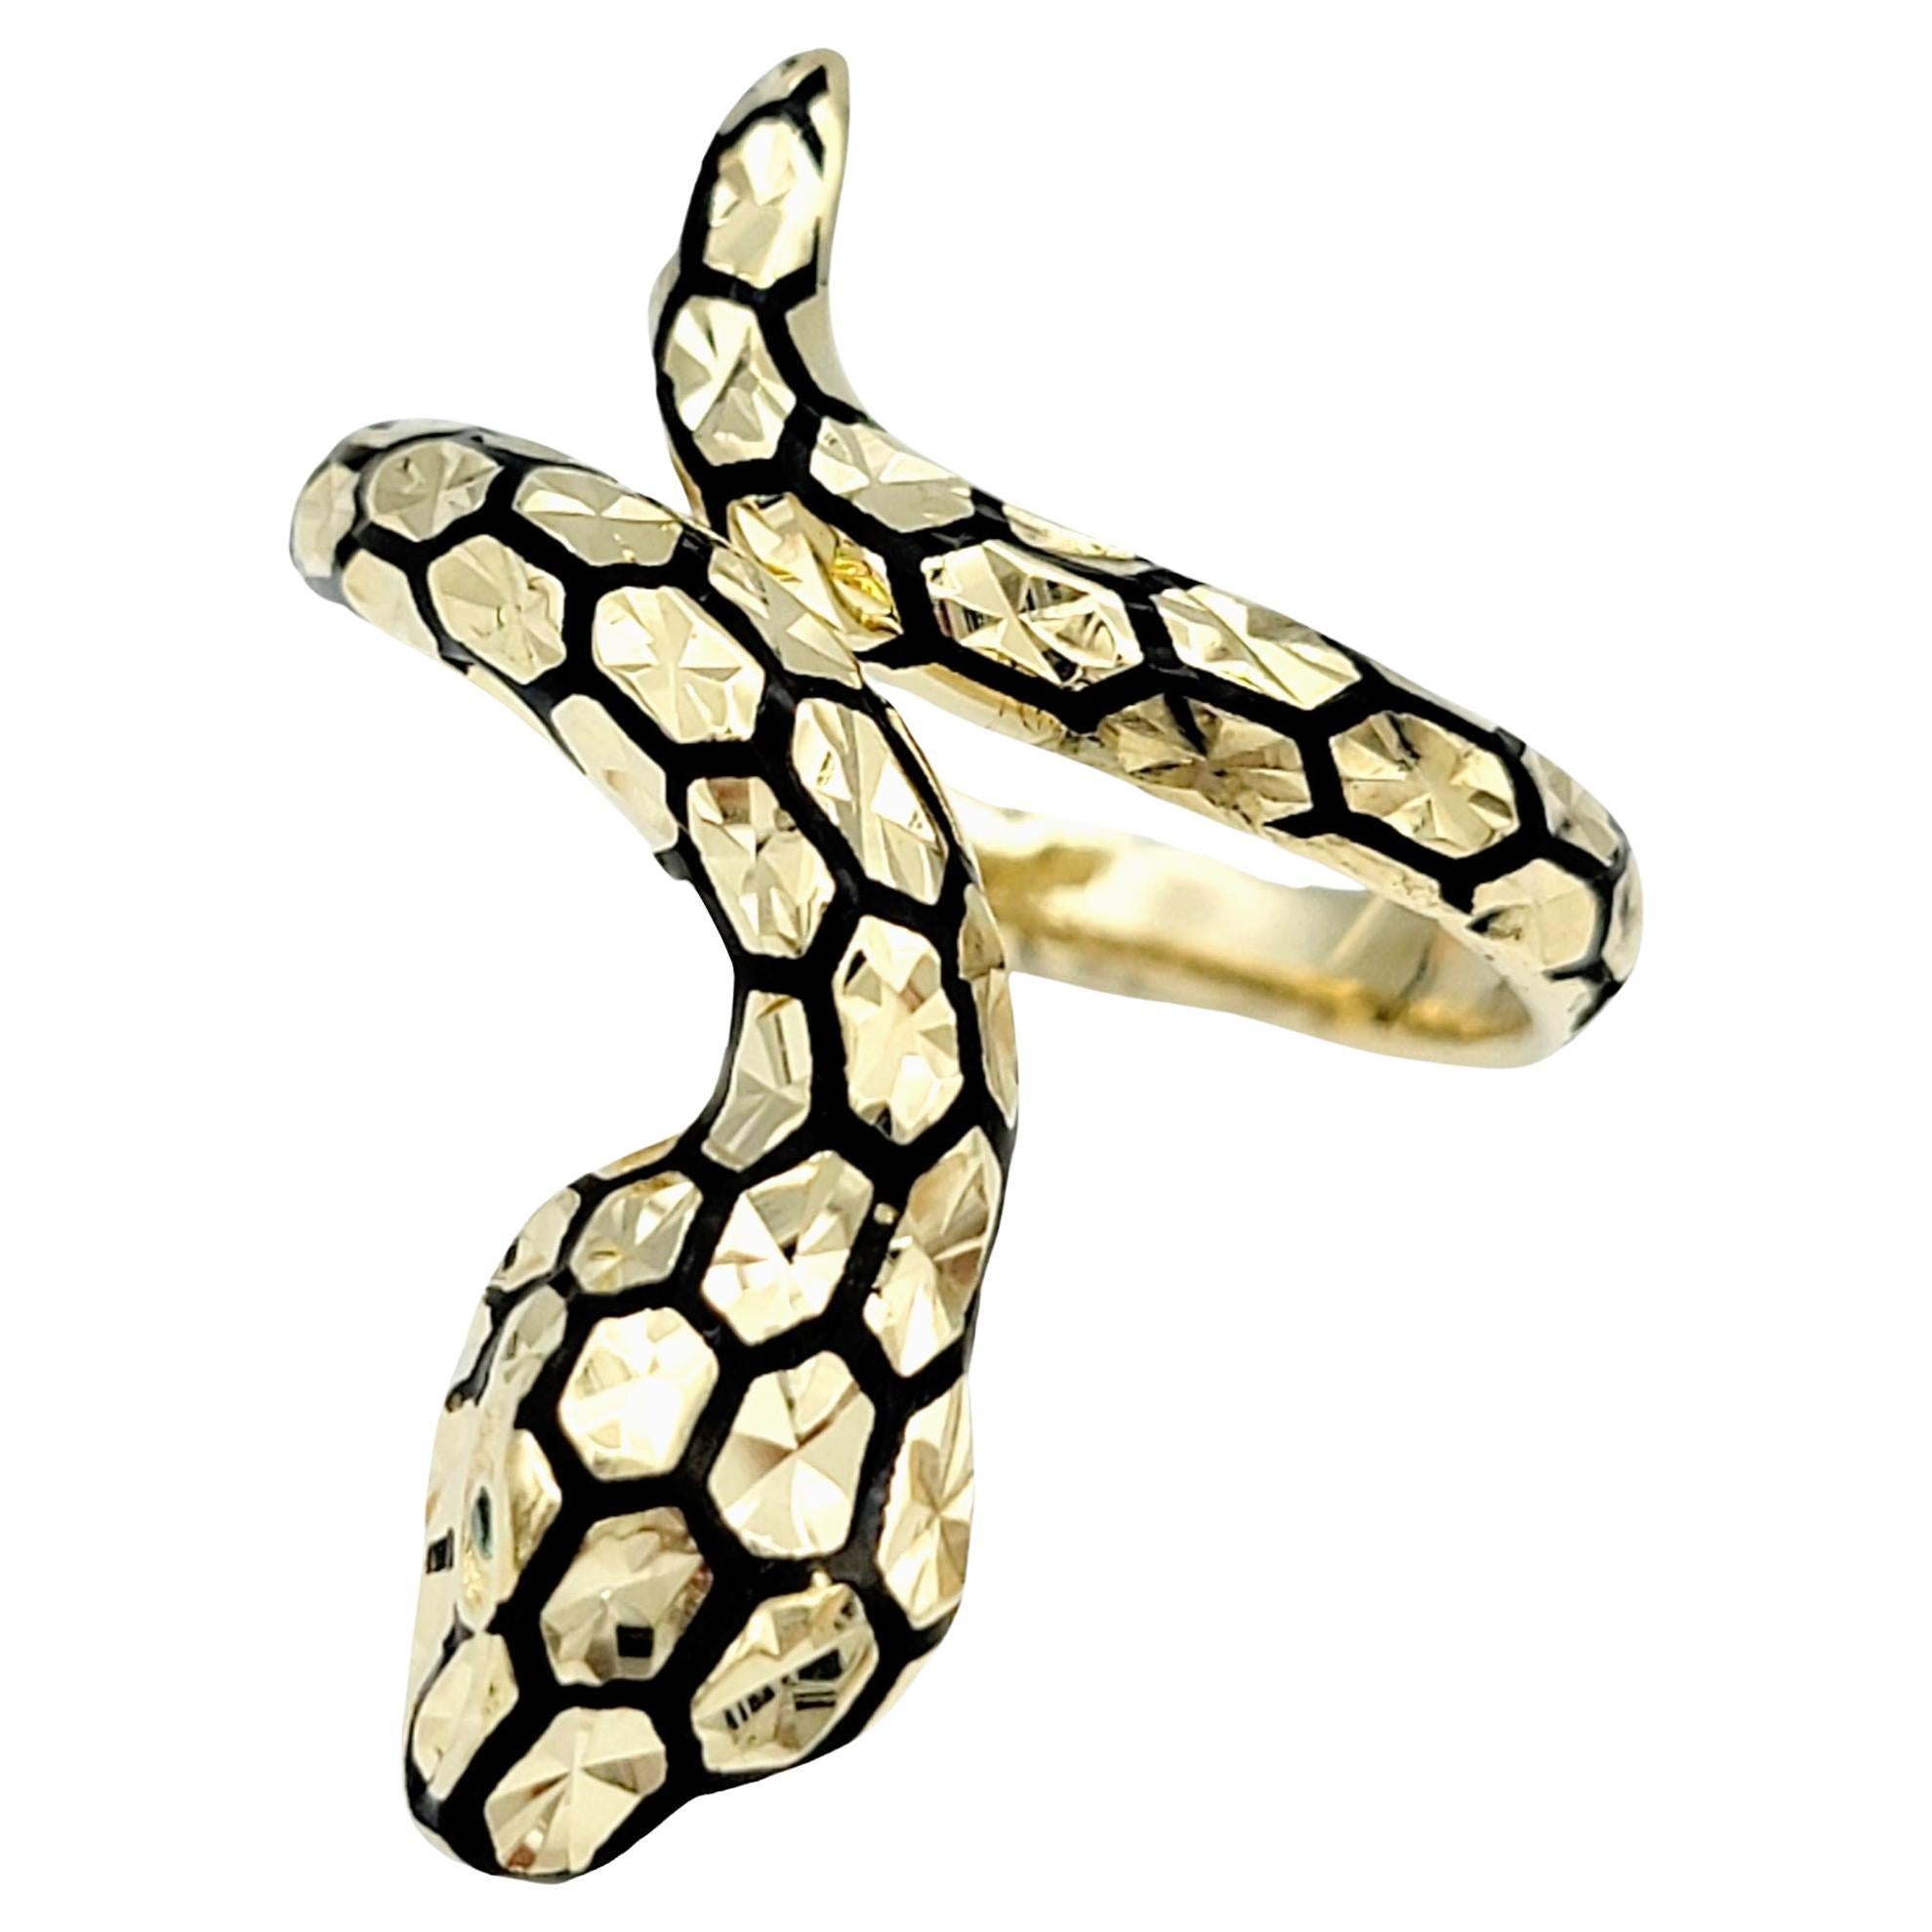 Ring is approximately a size 10. 

This 14 karat gold bypass ring is a true marvel of artistry, exuding a sense of mystique and bold elegance. Crafted in the shape of a sinuous snake, it beautifully combines elements of nature and